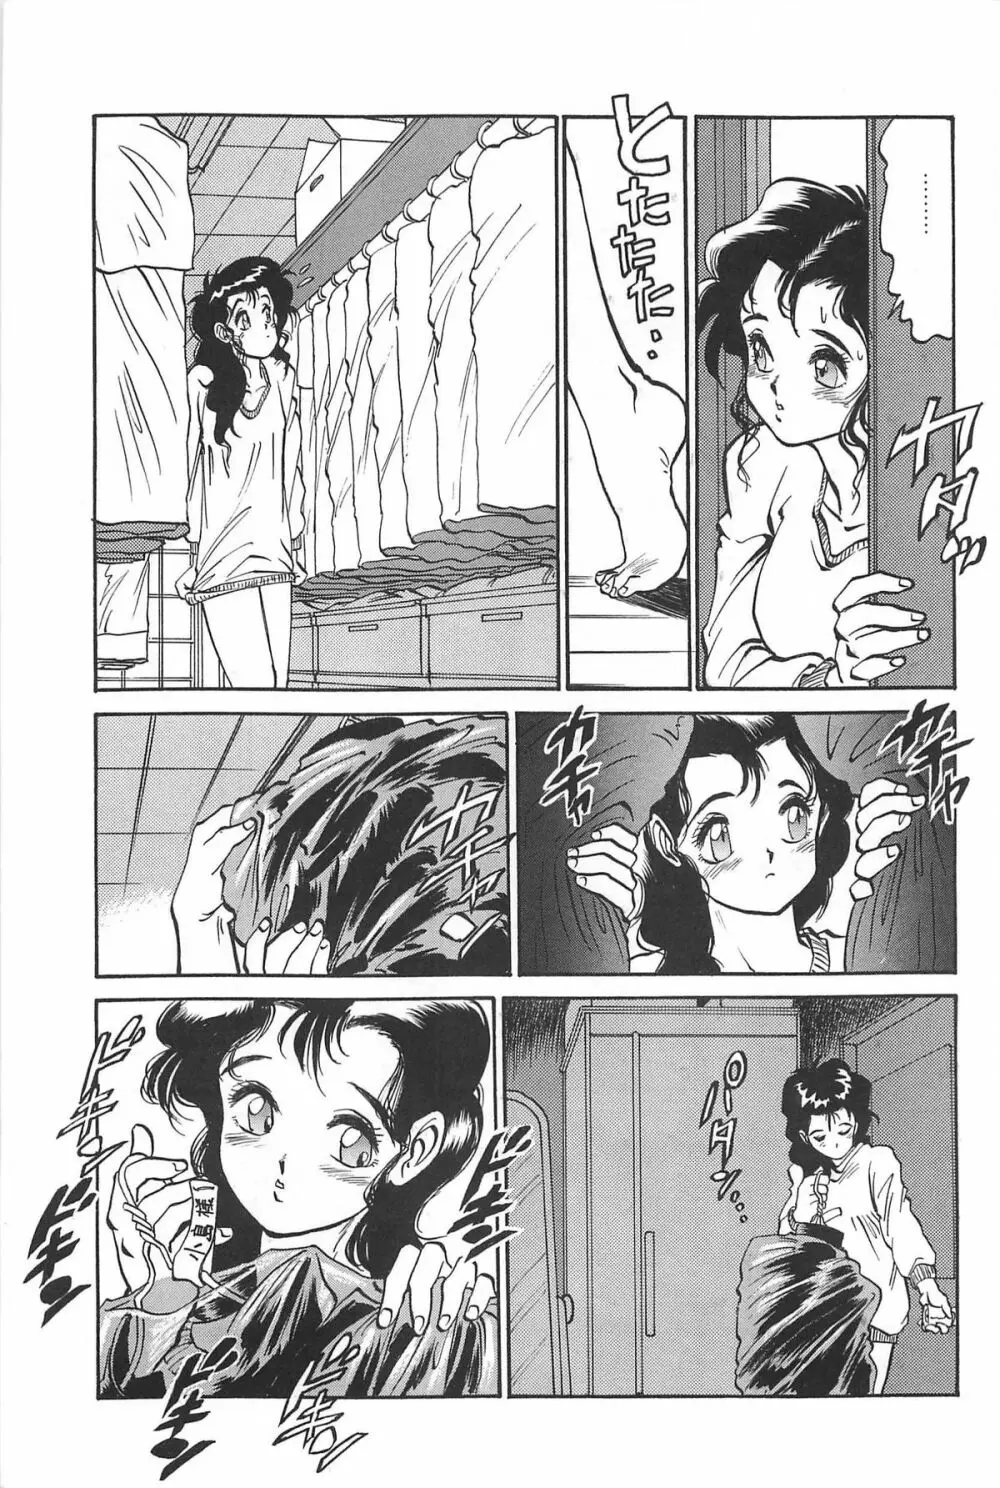 LOVE ME 1995 Page.21